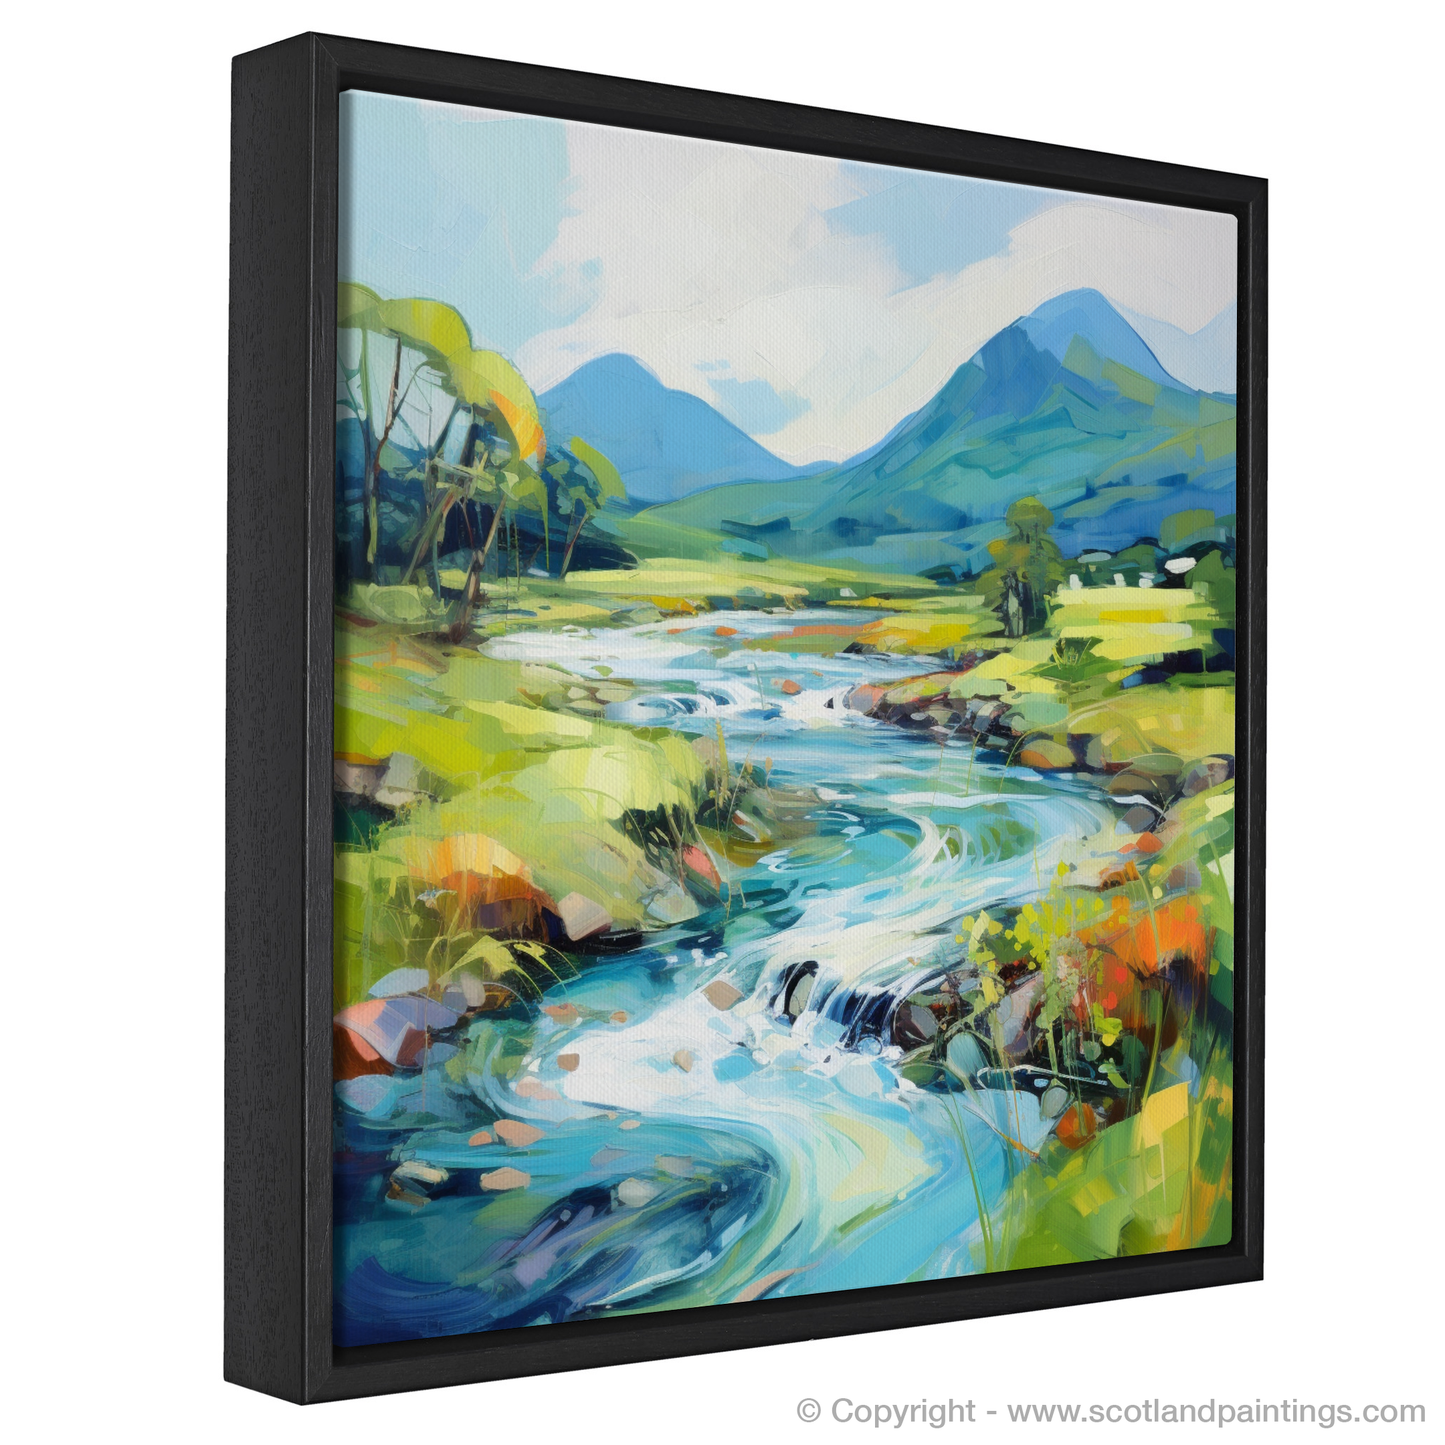 Painting and Art Print of River Etive, Argyll and Bute in summer entitled "Summer Serenade by River Etive".